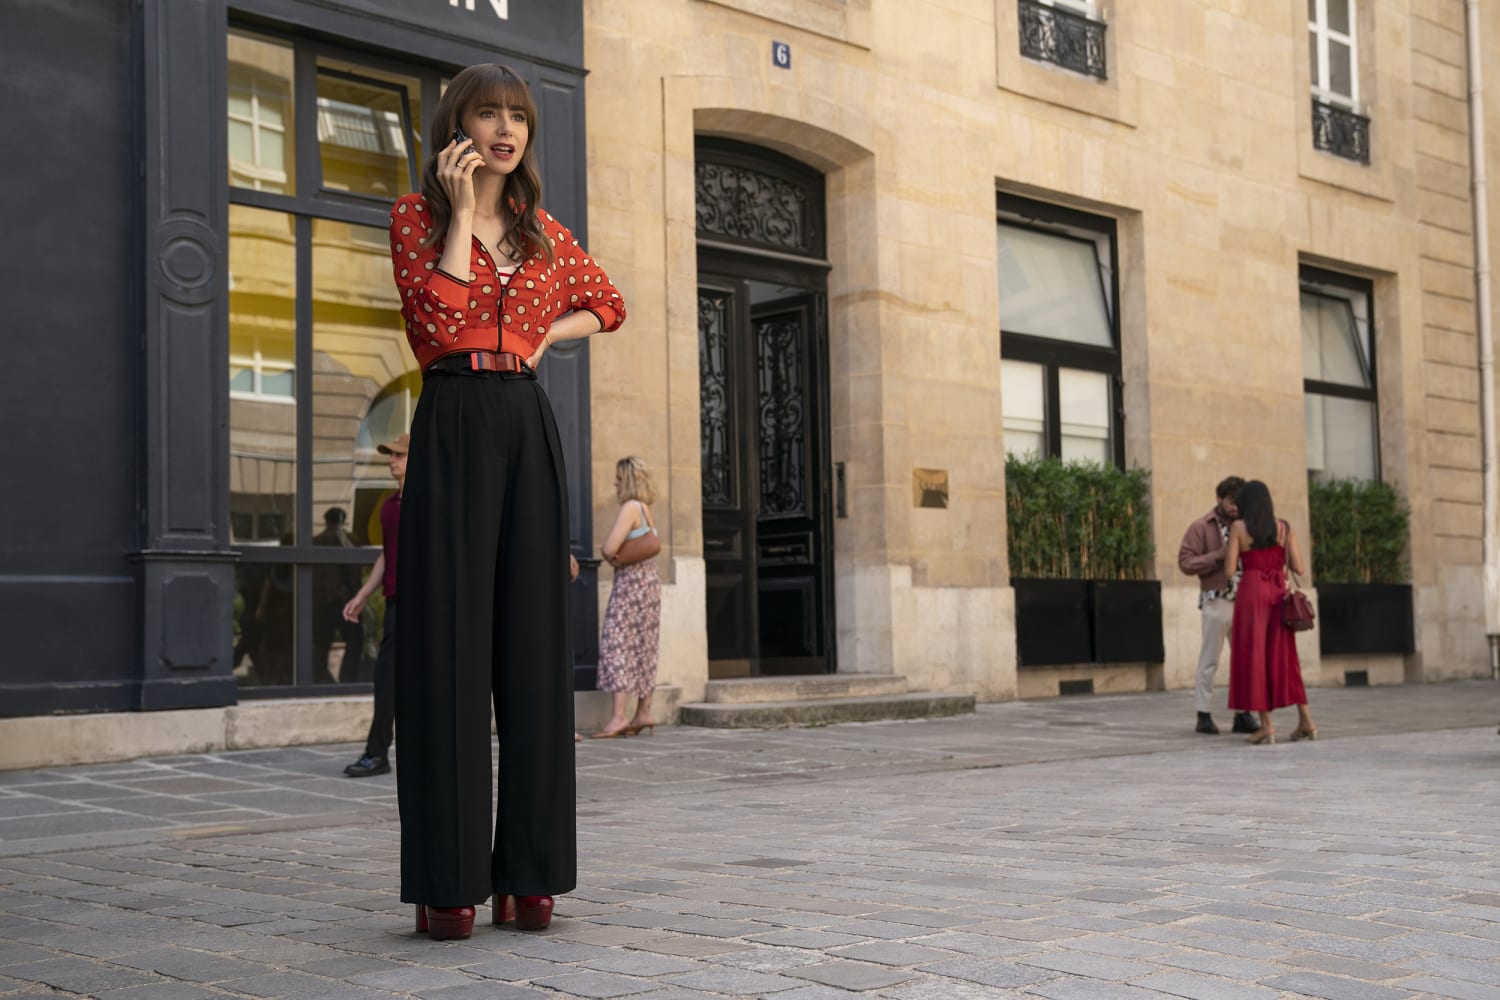 Discussing (and Replicating) The Fashion in Emily in Paris